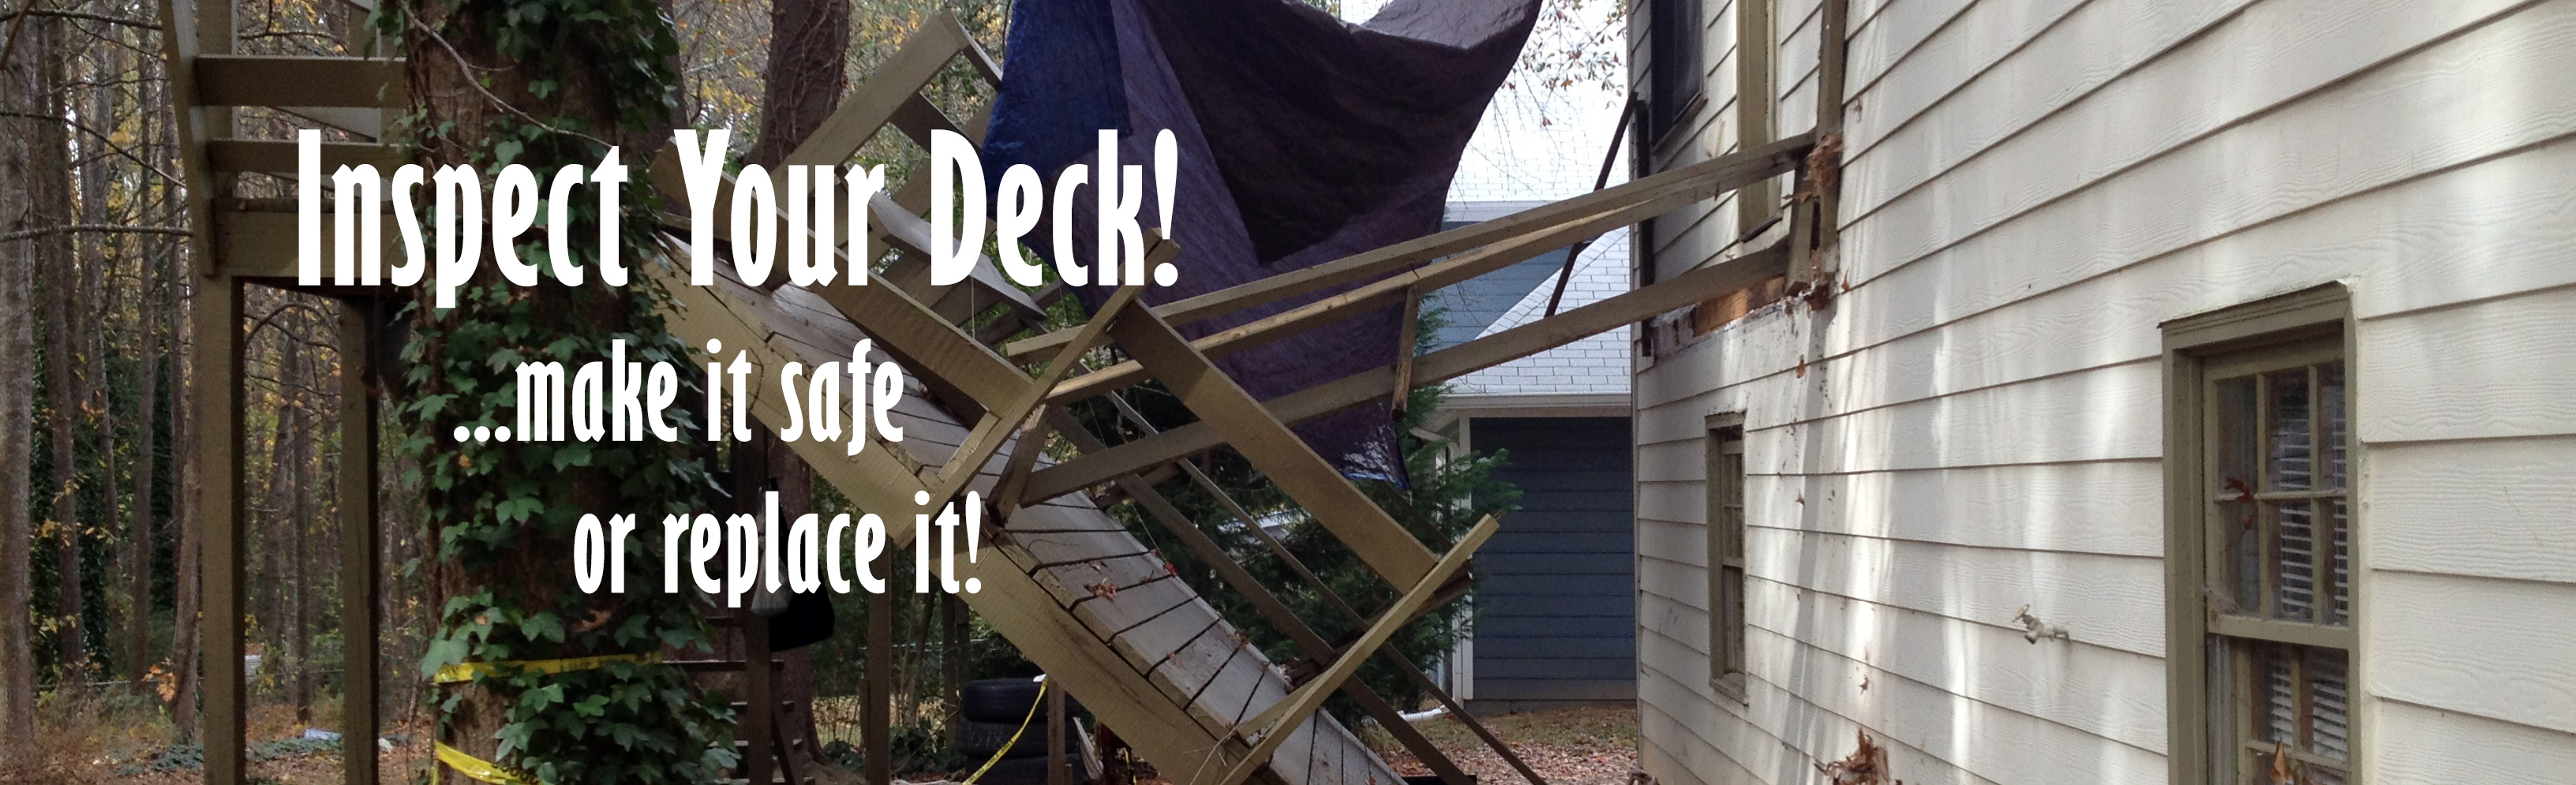 Inspect your deck!